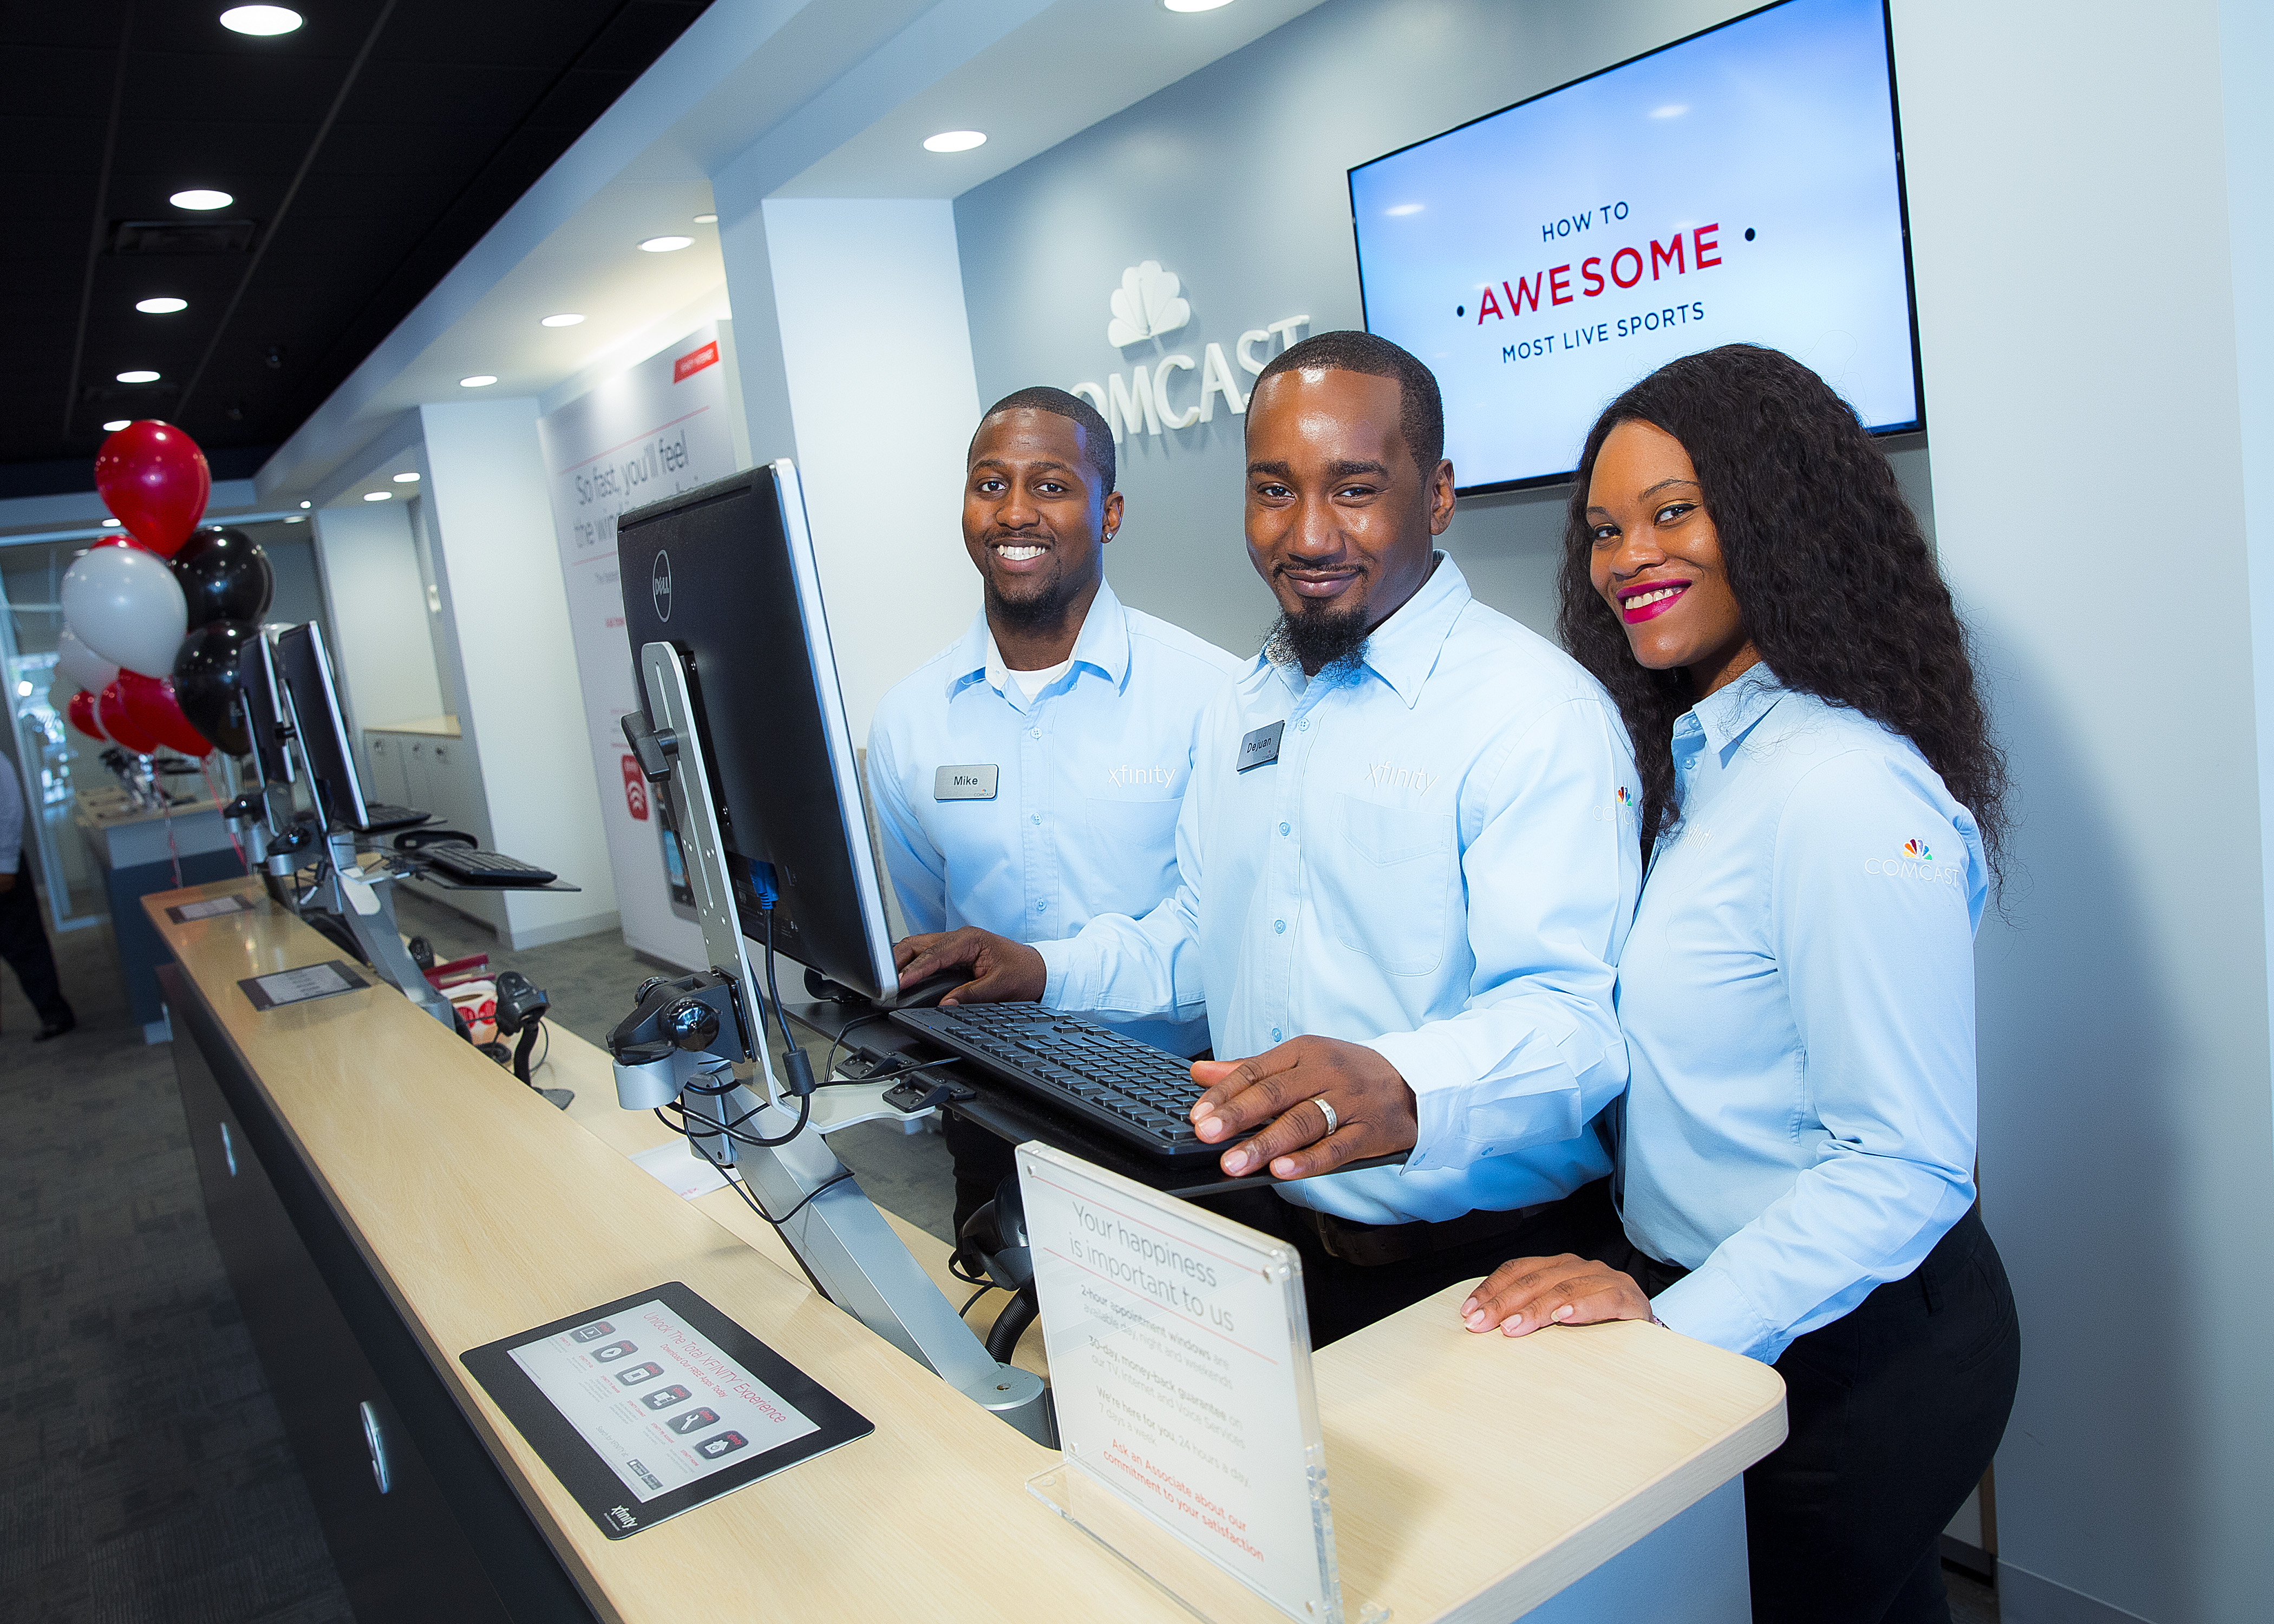 We recently opened our newest Xfinity Store in the region in West Orange, N...